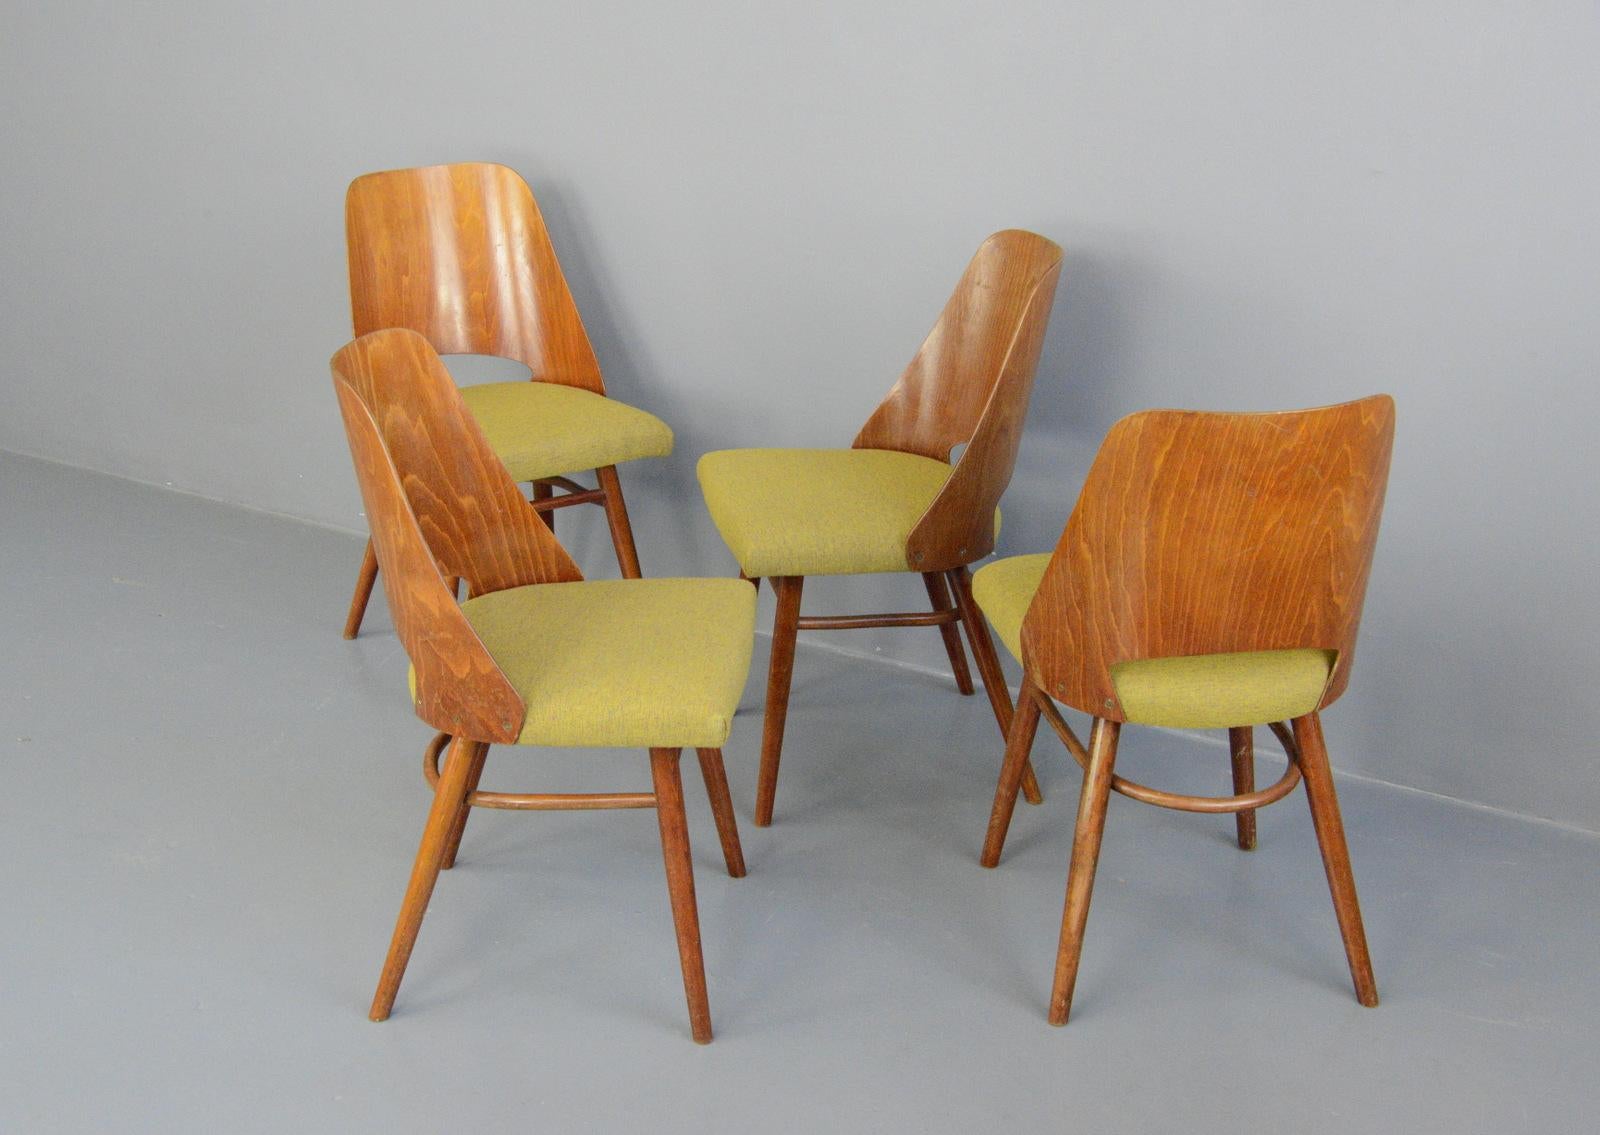 Dining chairs by Oswald Haerdtl for Ton, circa 1960s

- Price is for the set of 4
- Shaped ply back rests
- Beech frame
- New mustard upholstery
- Designed by Oswald Haerdtl
- Produced by Ton
- Czech ~ 1960s
- 43cm wide x 43cm deep x 80cm